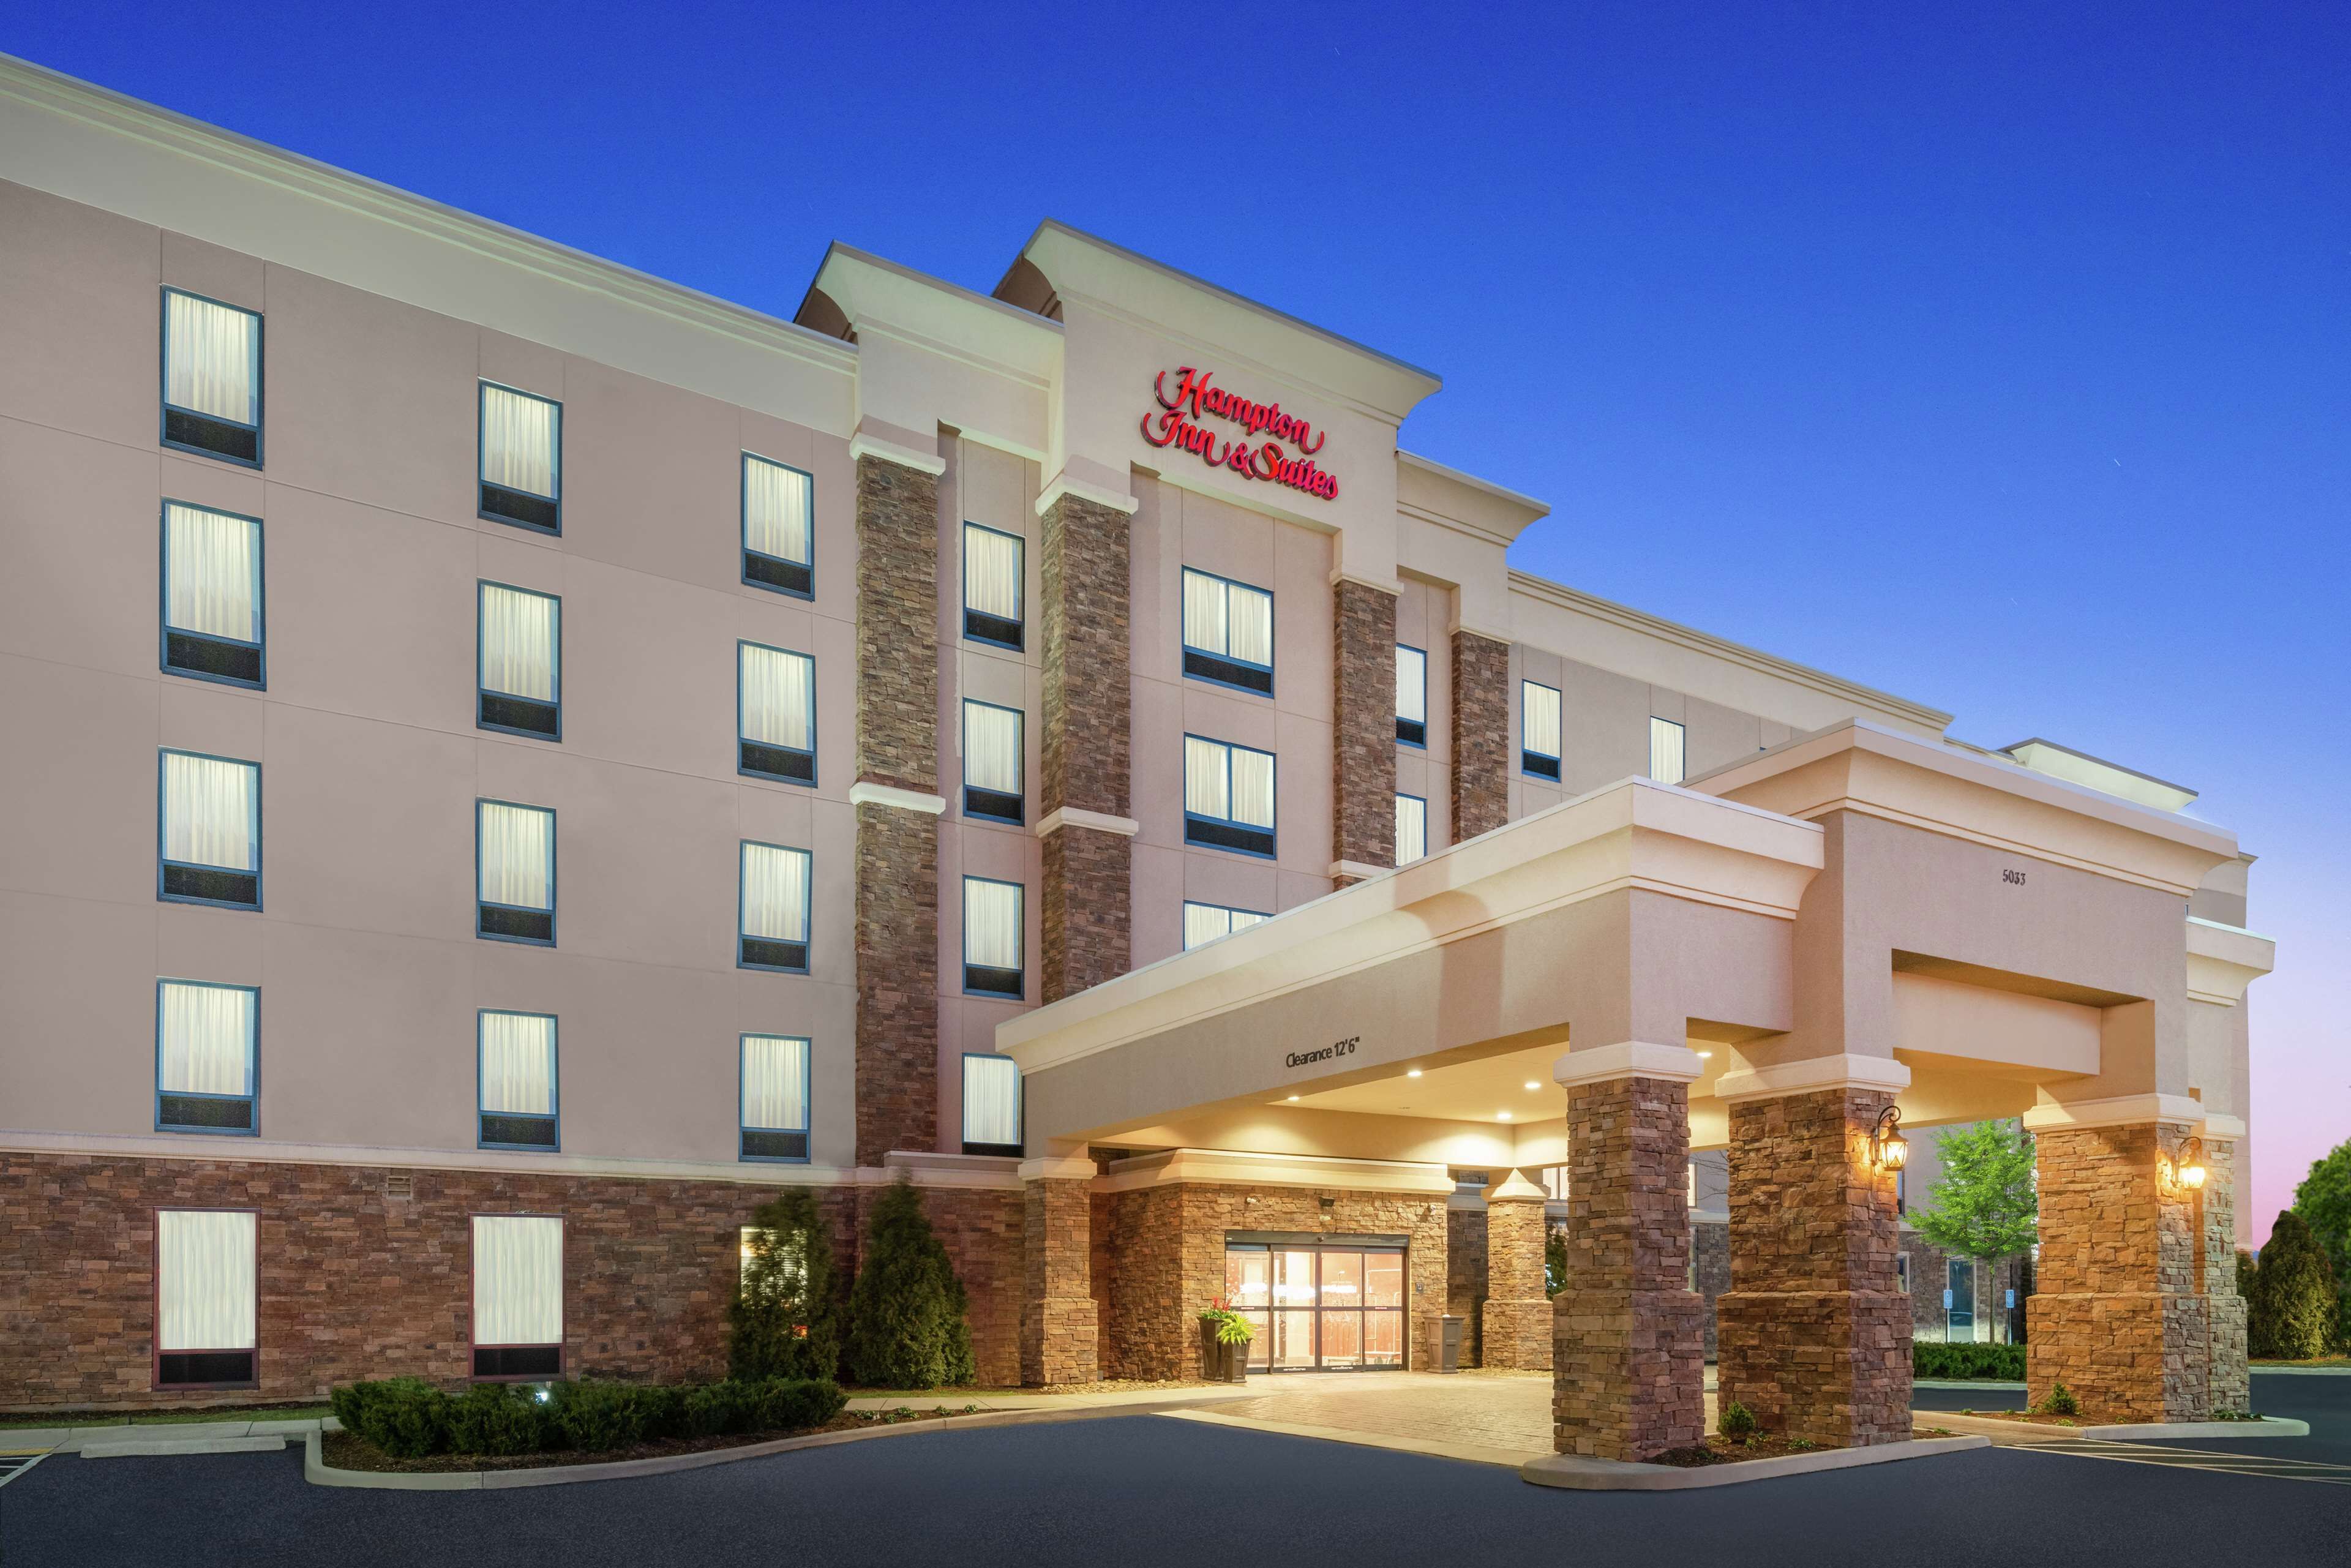 Hampton Inn and Suites Roanoke Airport/Valley View Mall image 1